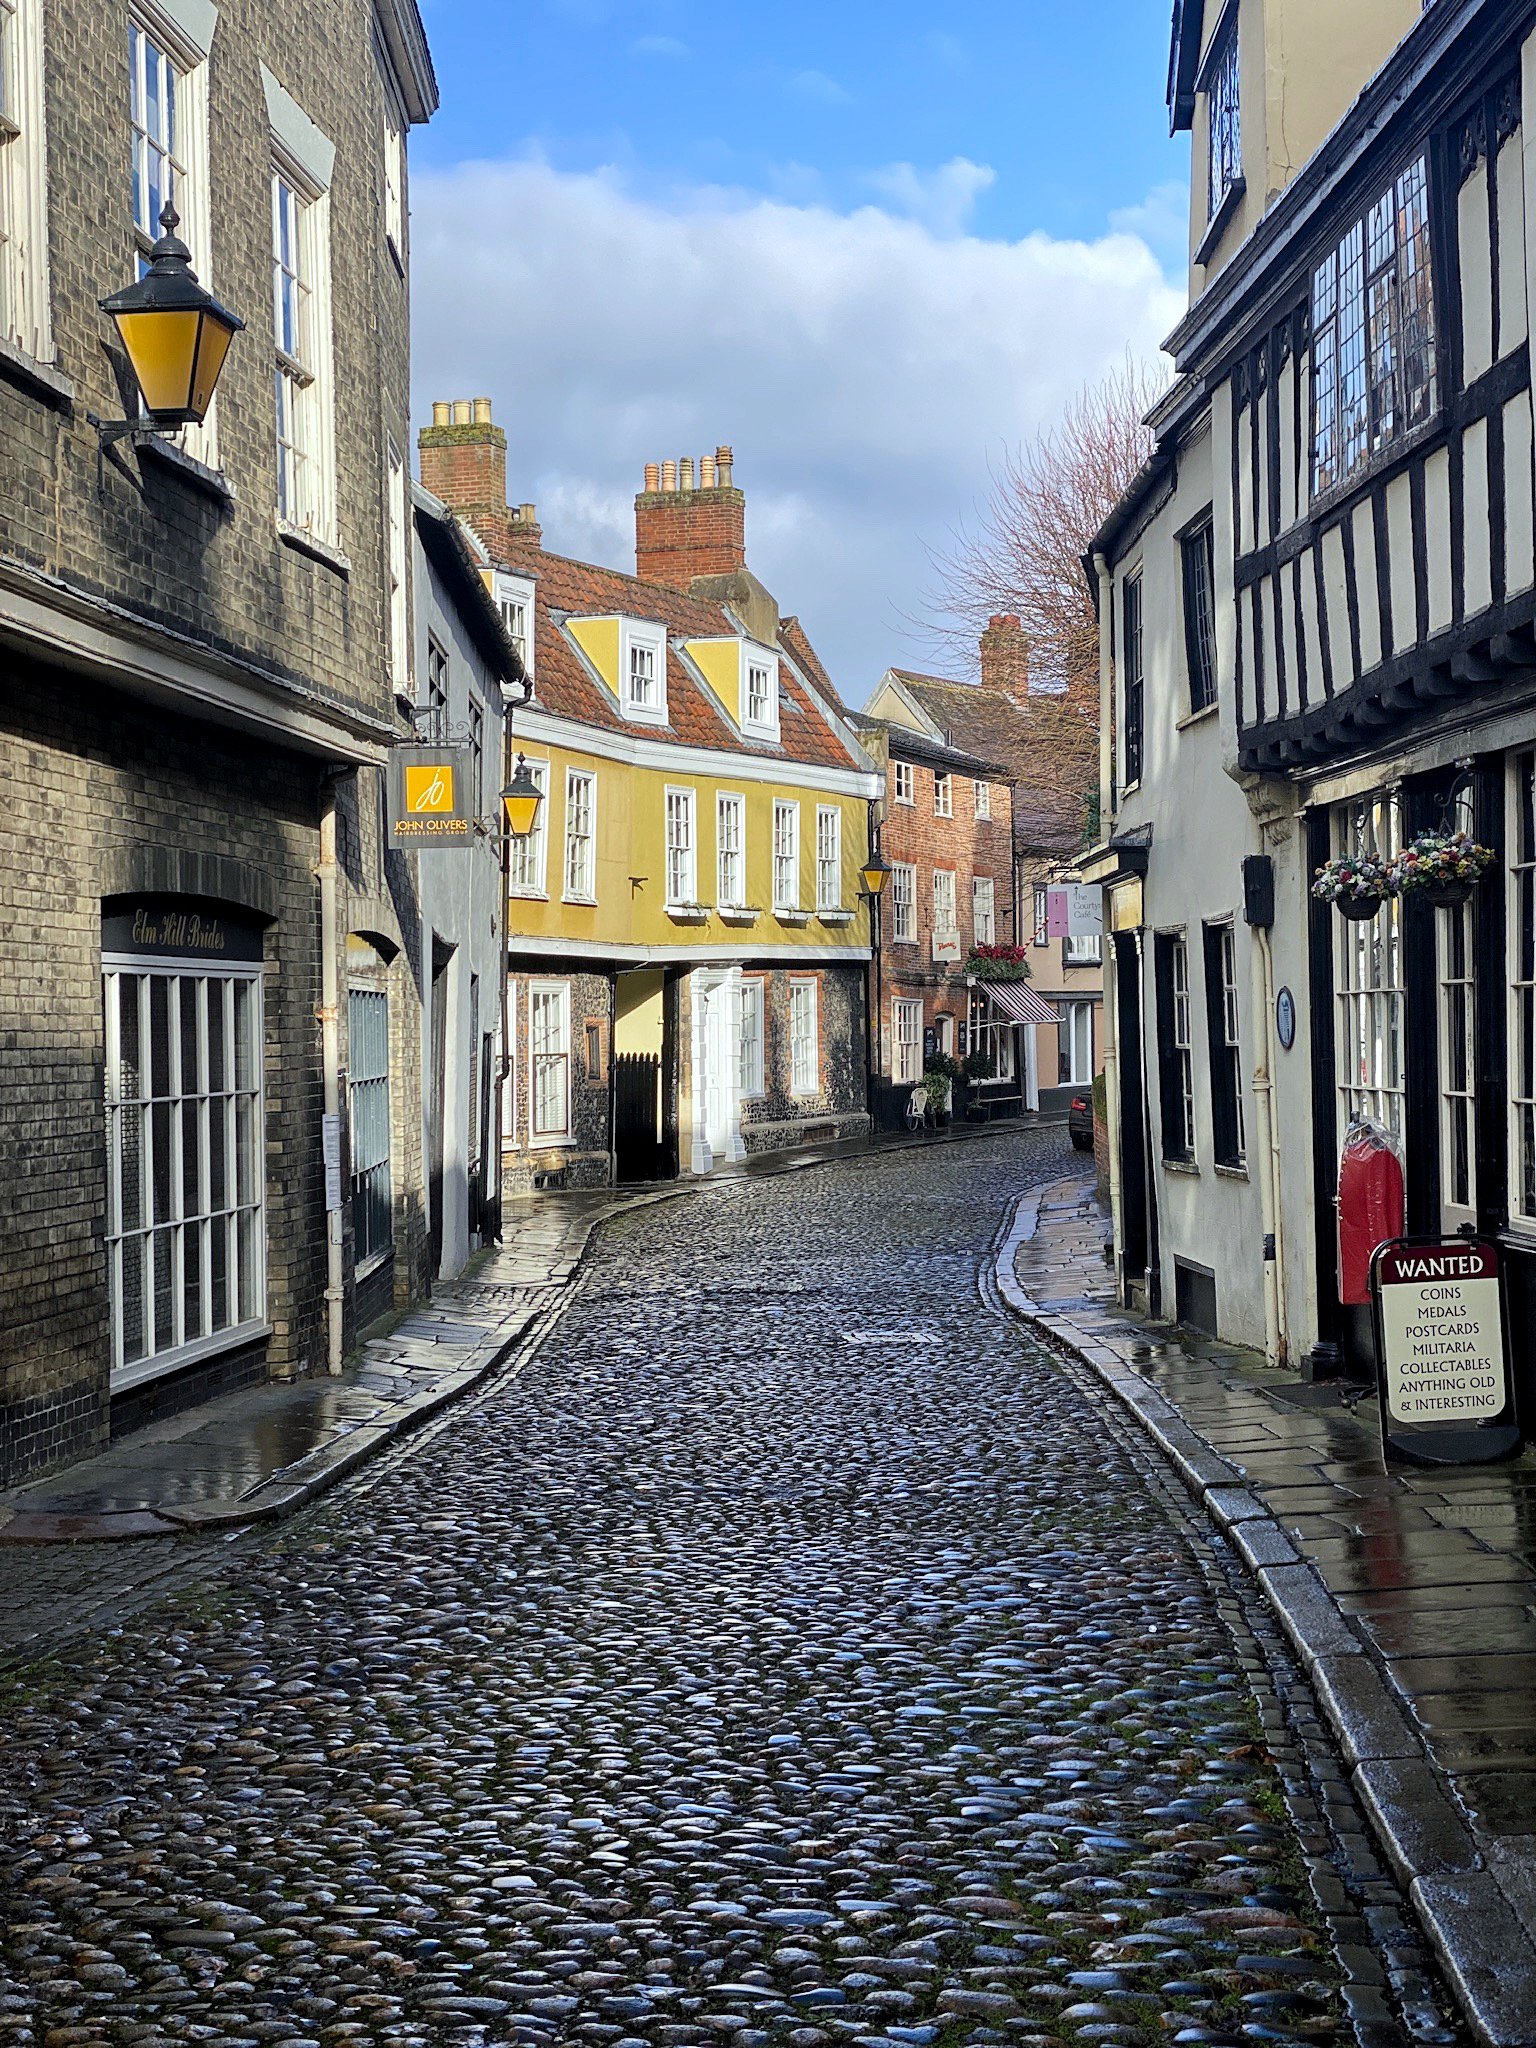 A cobbled historic street in the city of Norwich, Norfolk